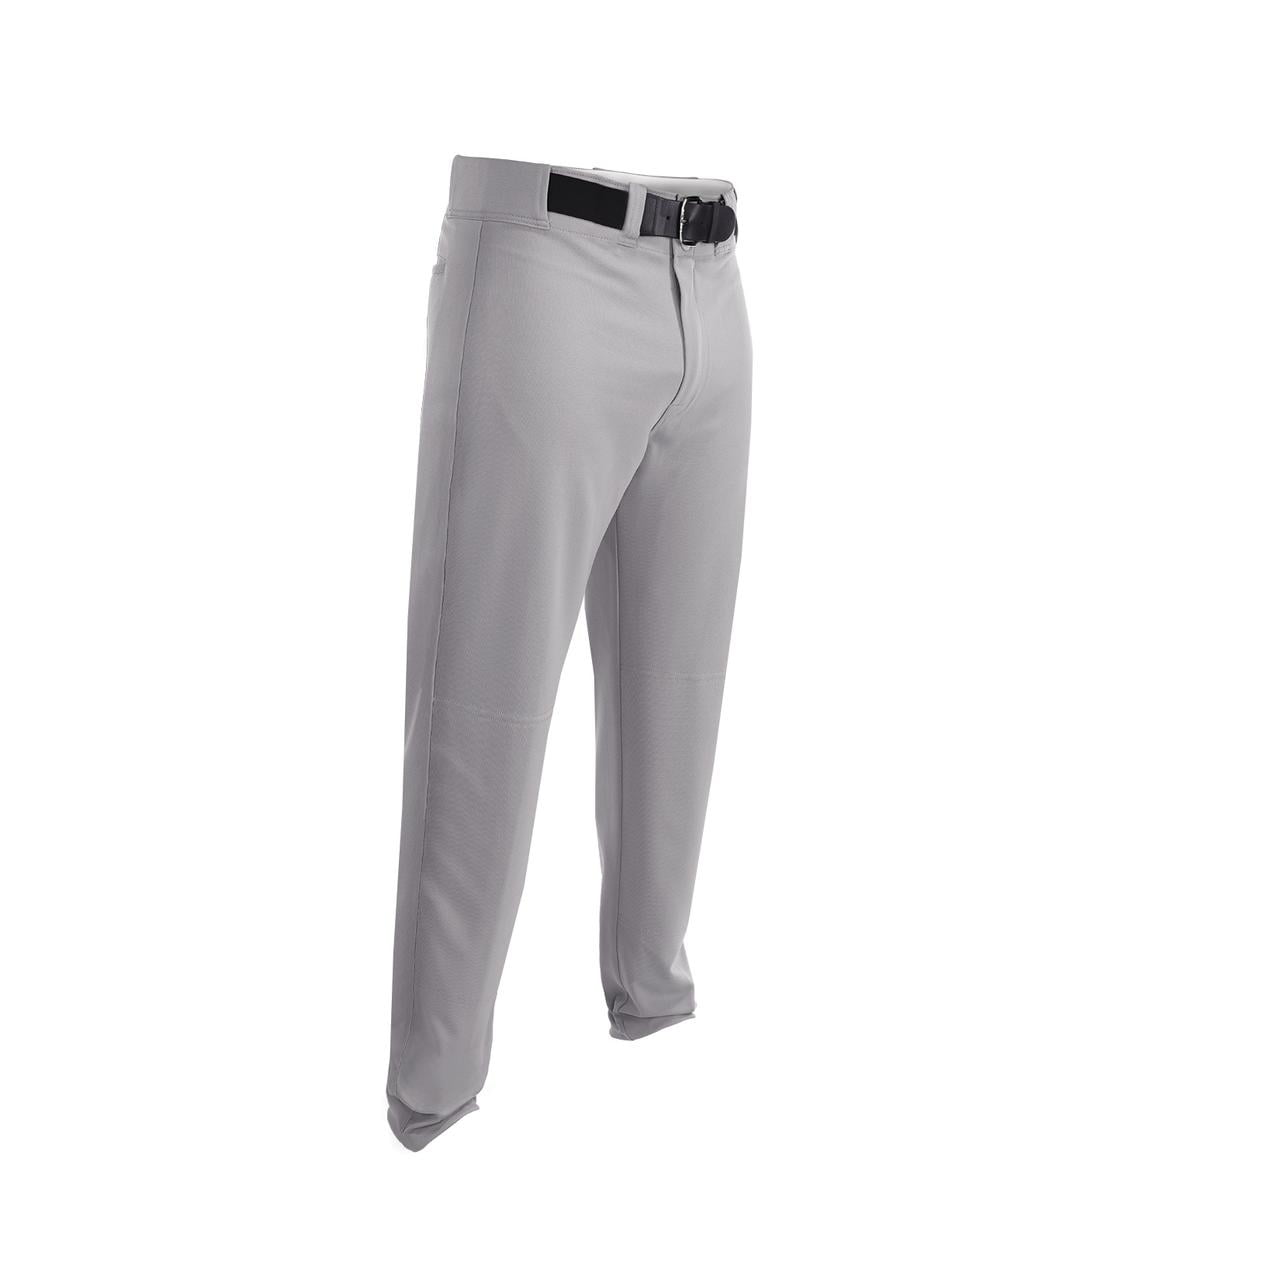 Easton Pro Knickers Baseball Pant Grey with Navy Piping Adult 